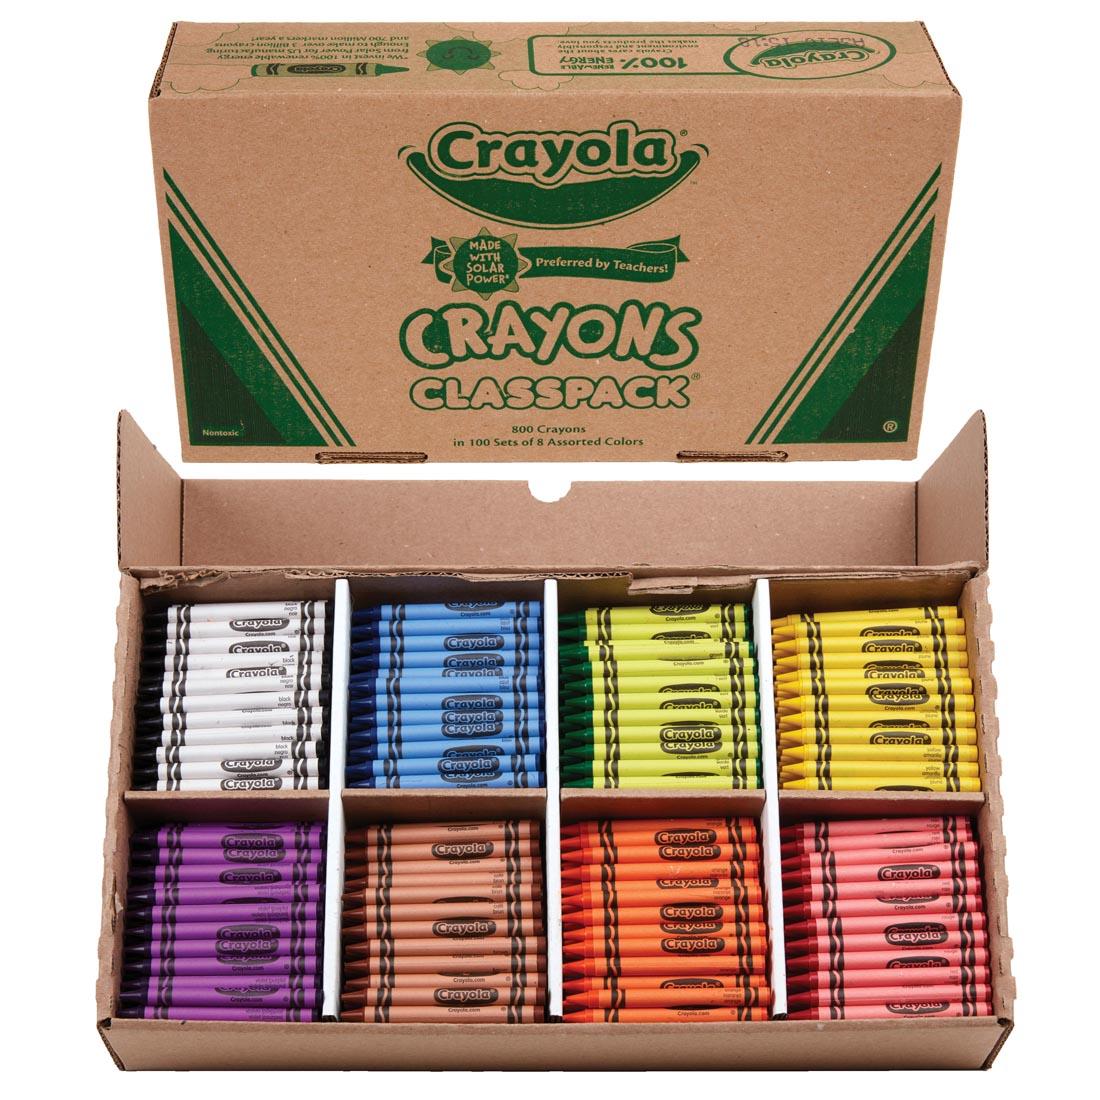 Crayola Regular Crayons 8-Color Classpack Box Shown both Open and Closed